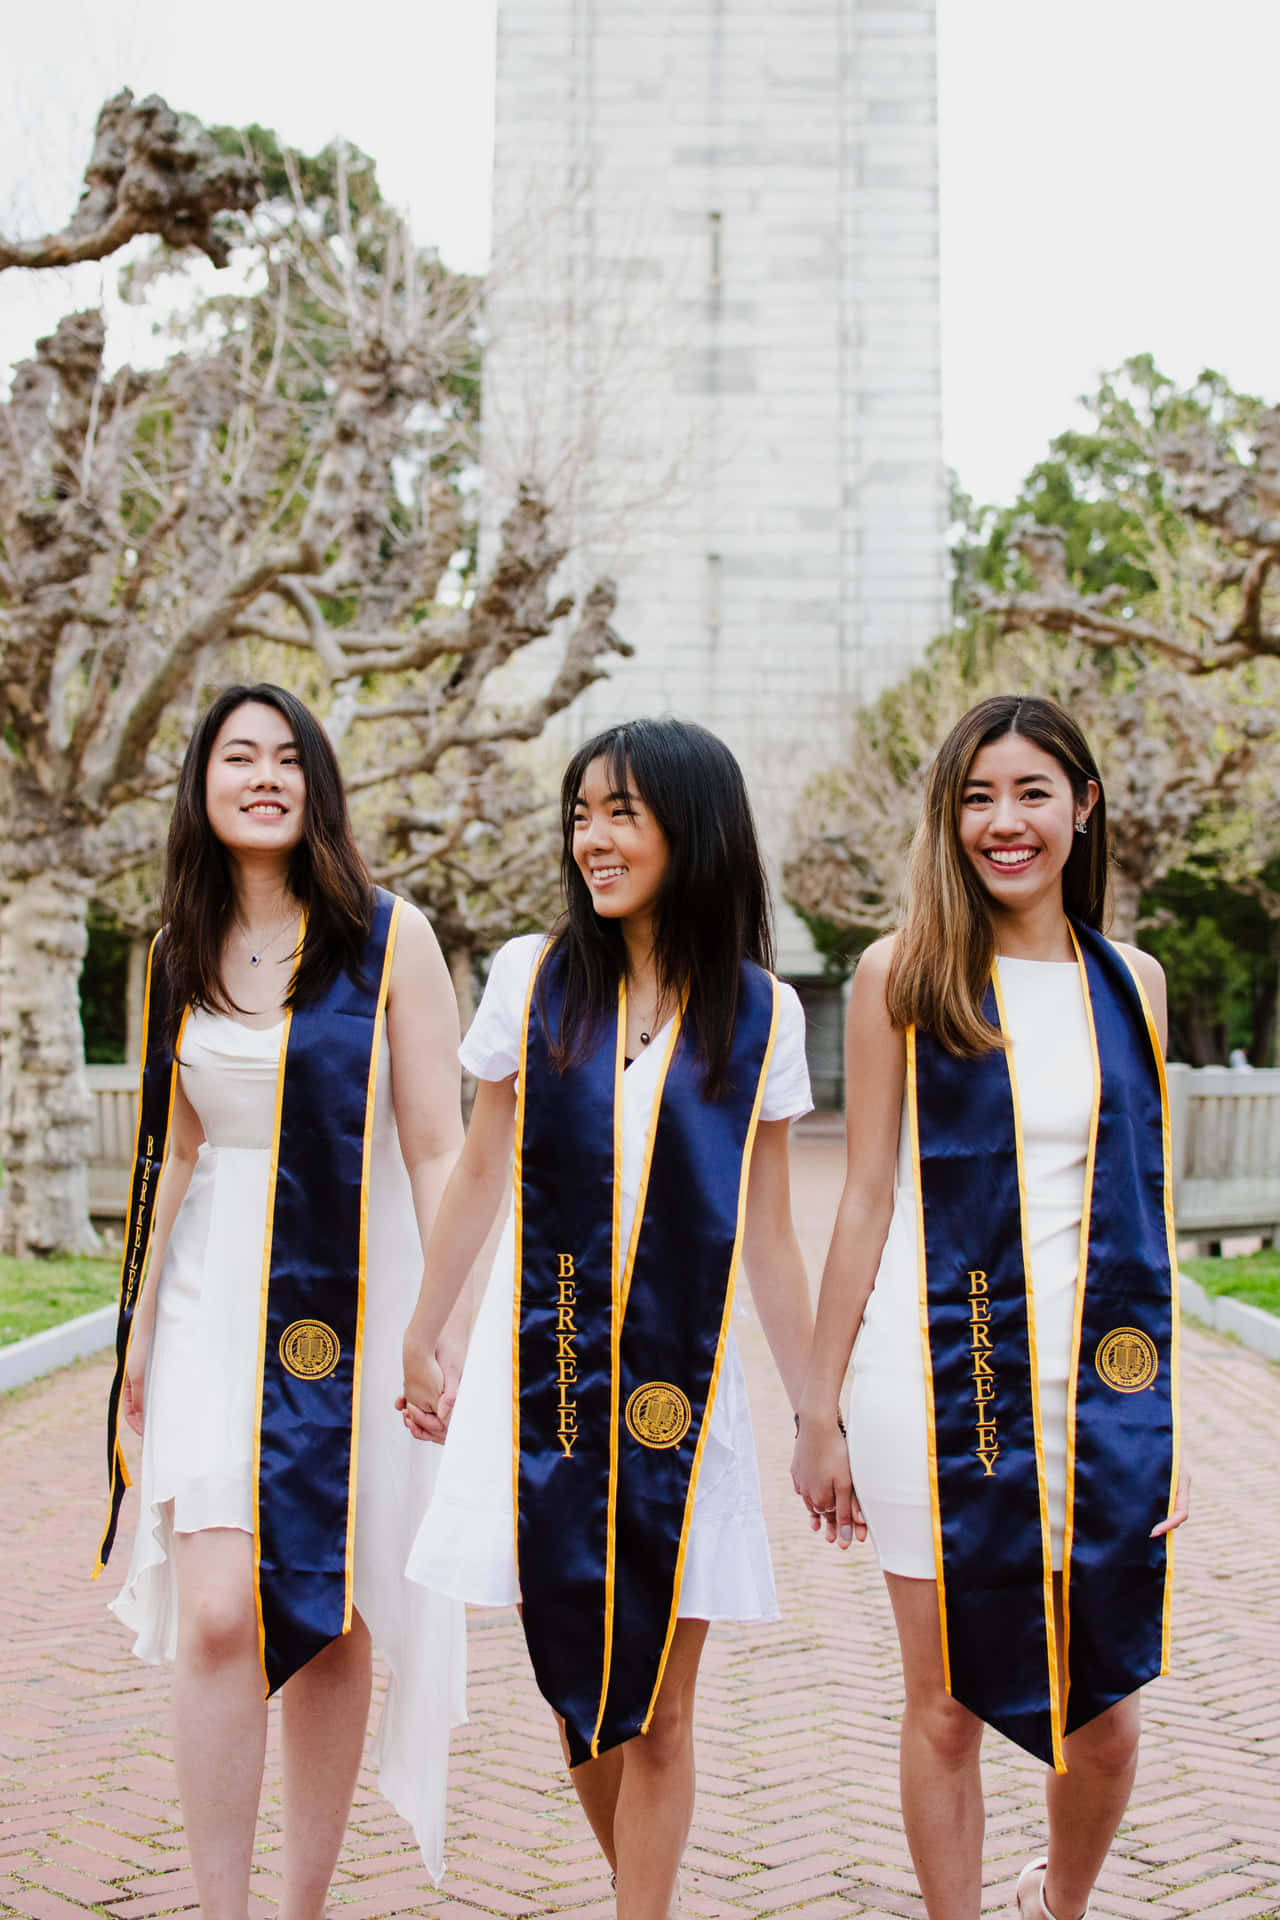 Three Women In Graduation Gowns Holding Hands